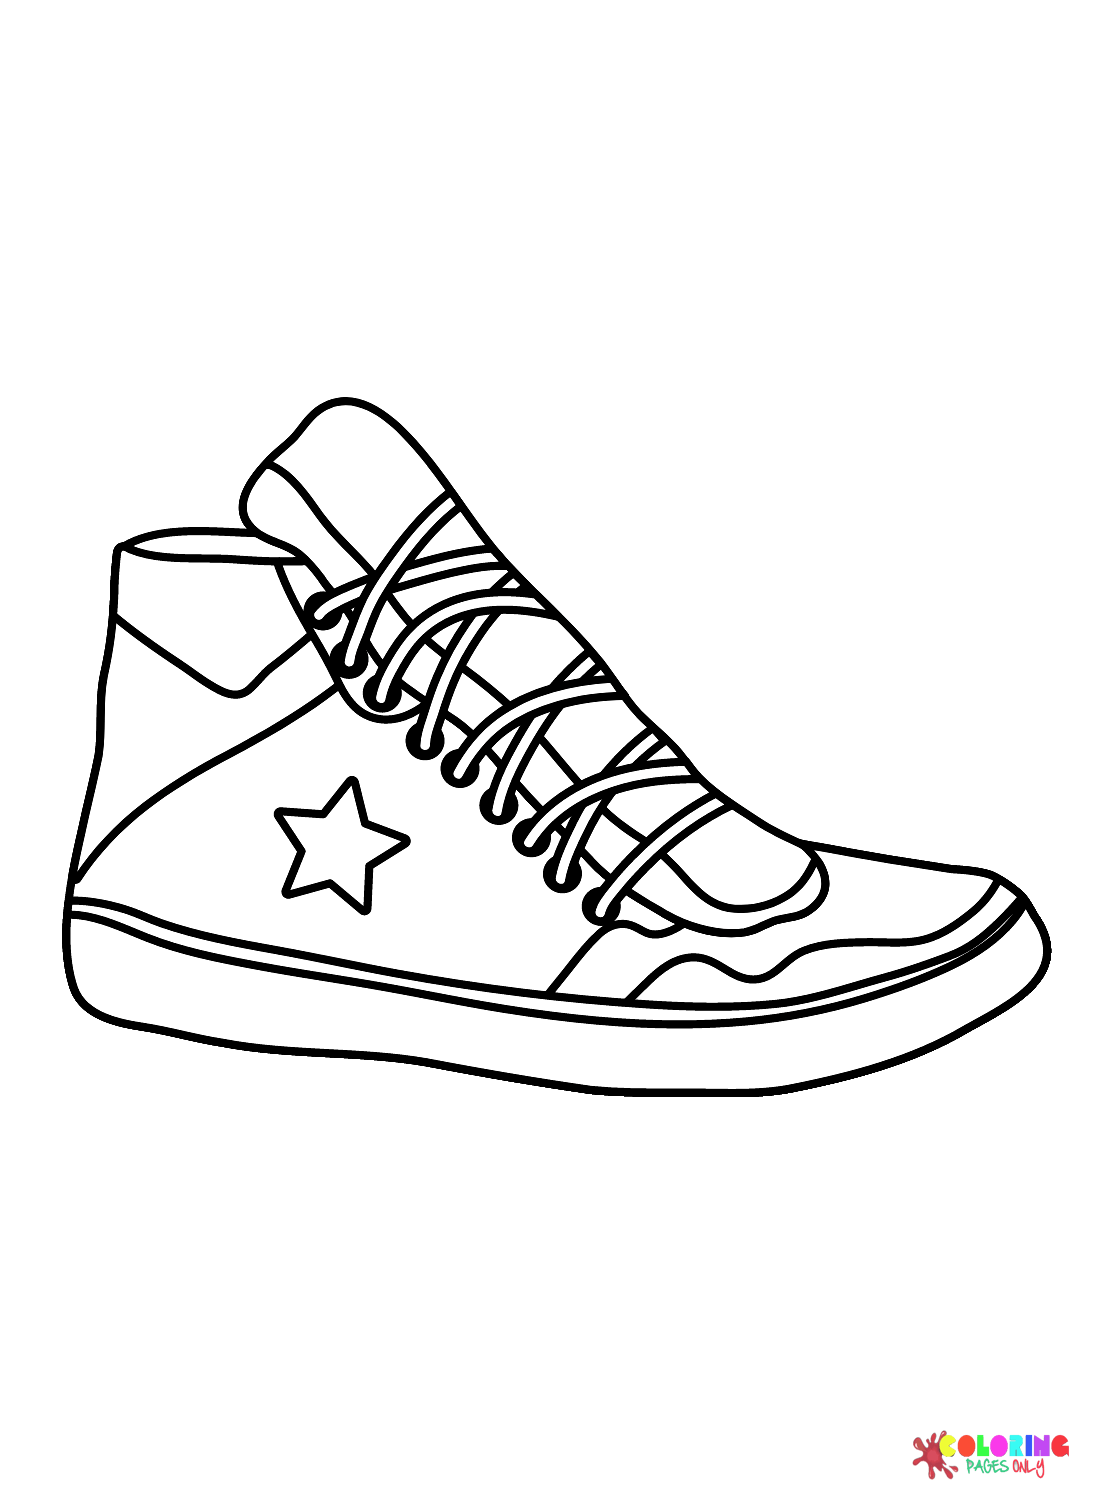 Sneaker with Star from Sneaker